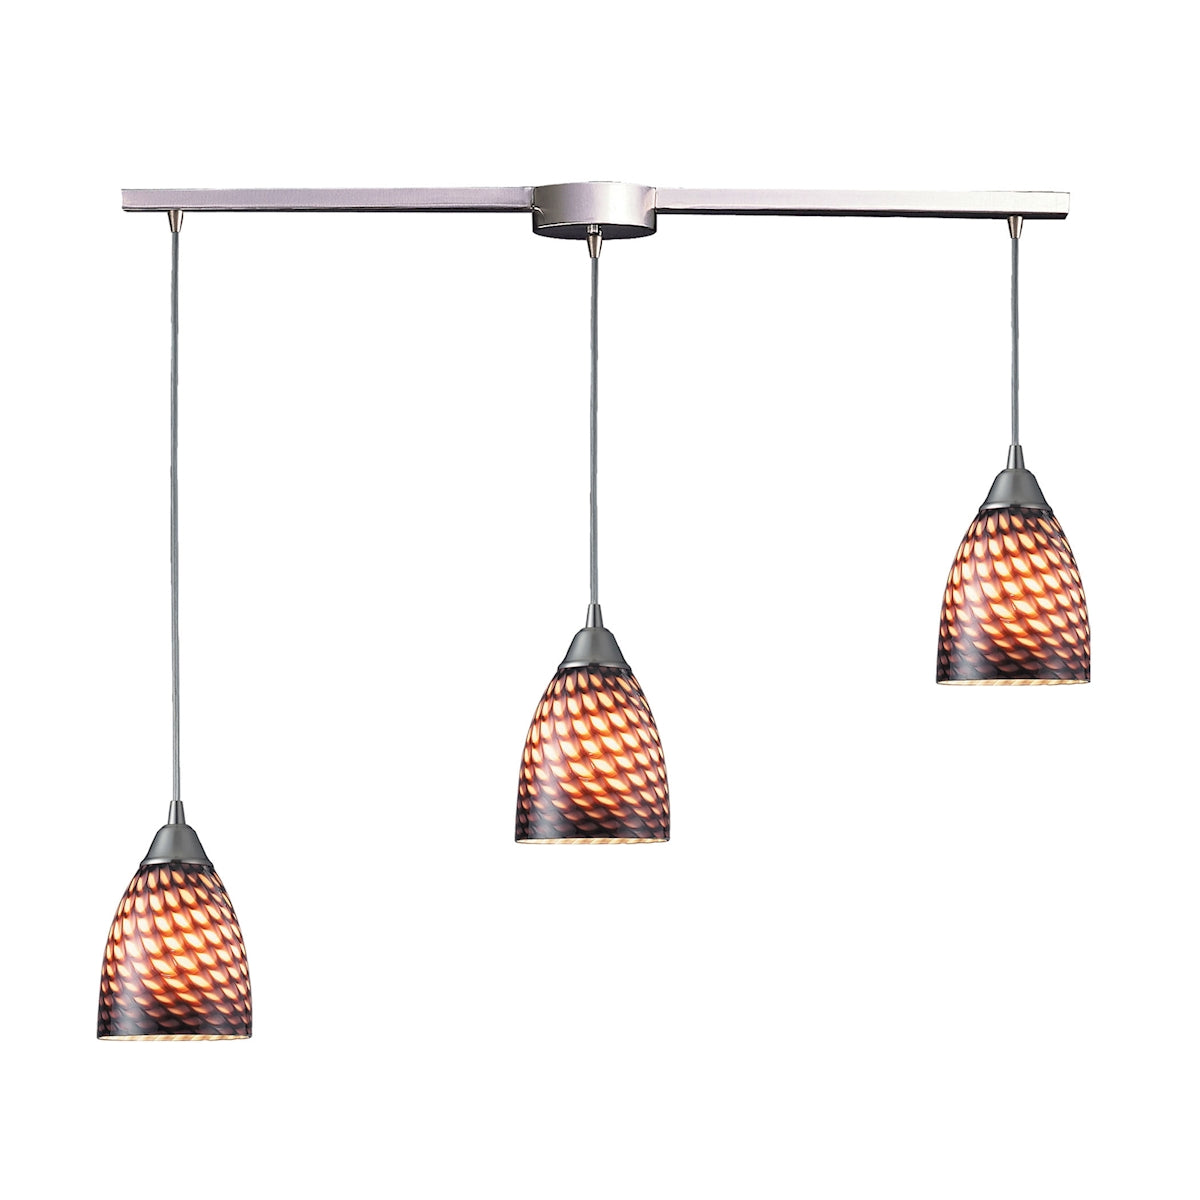 ELK Lighting 416-3L-C Arco Baleno 3-Light Linear Pendant Fixture in Satin Nickel with Coco Glass